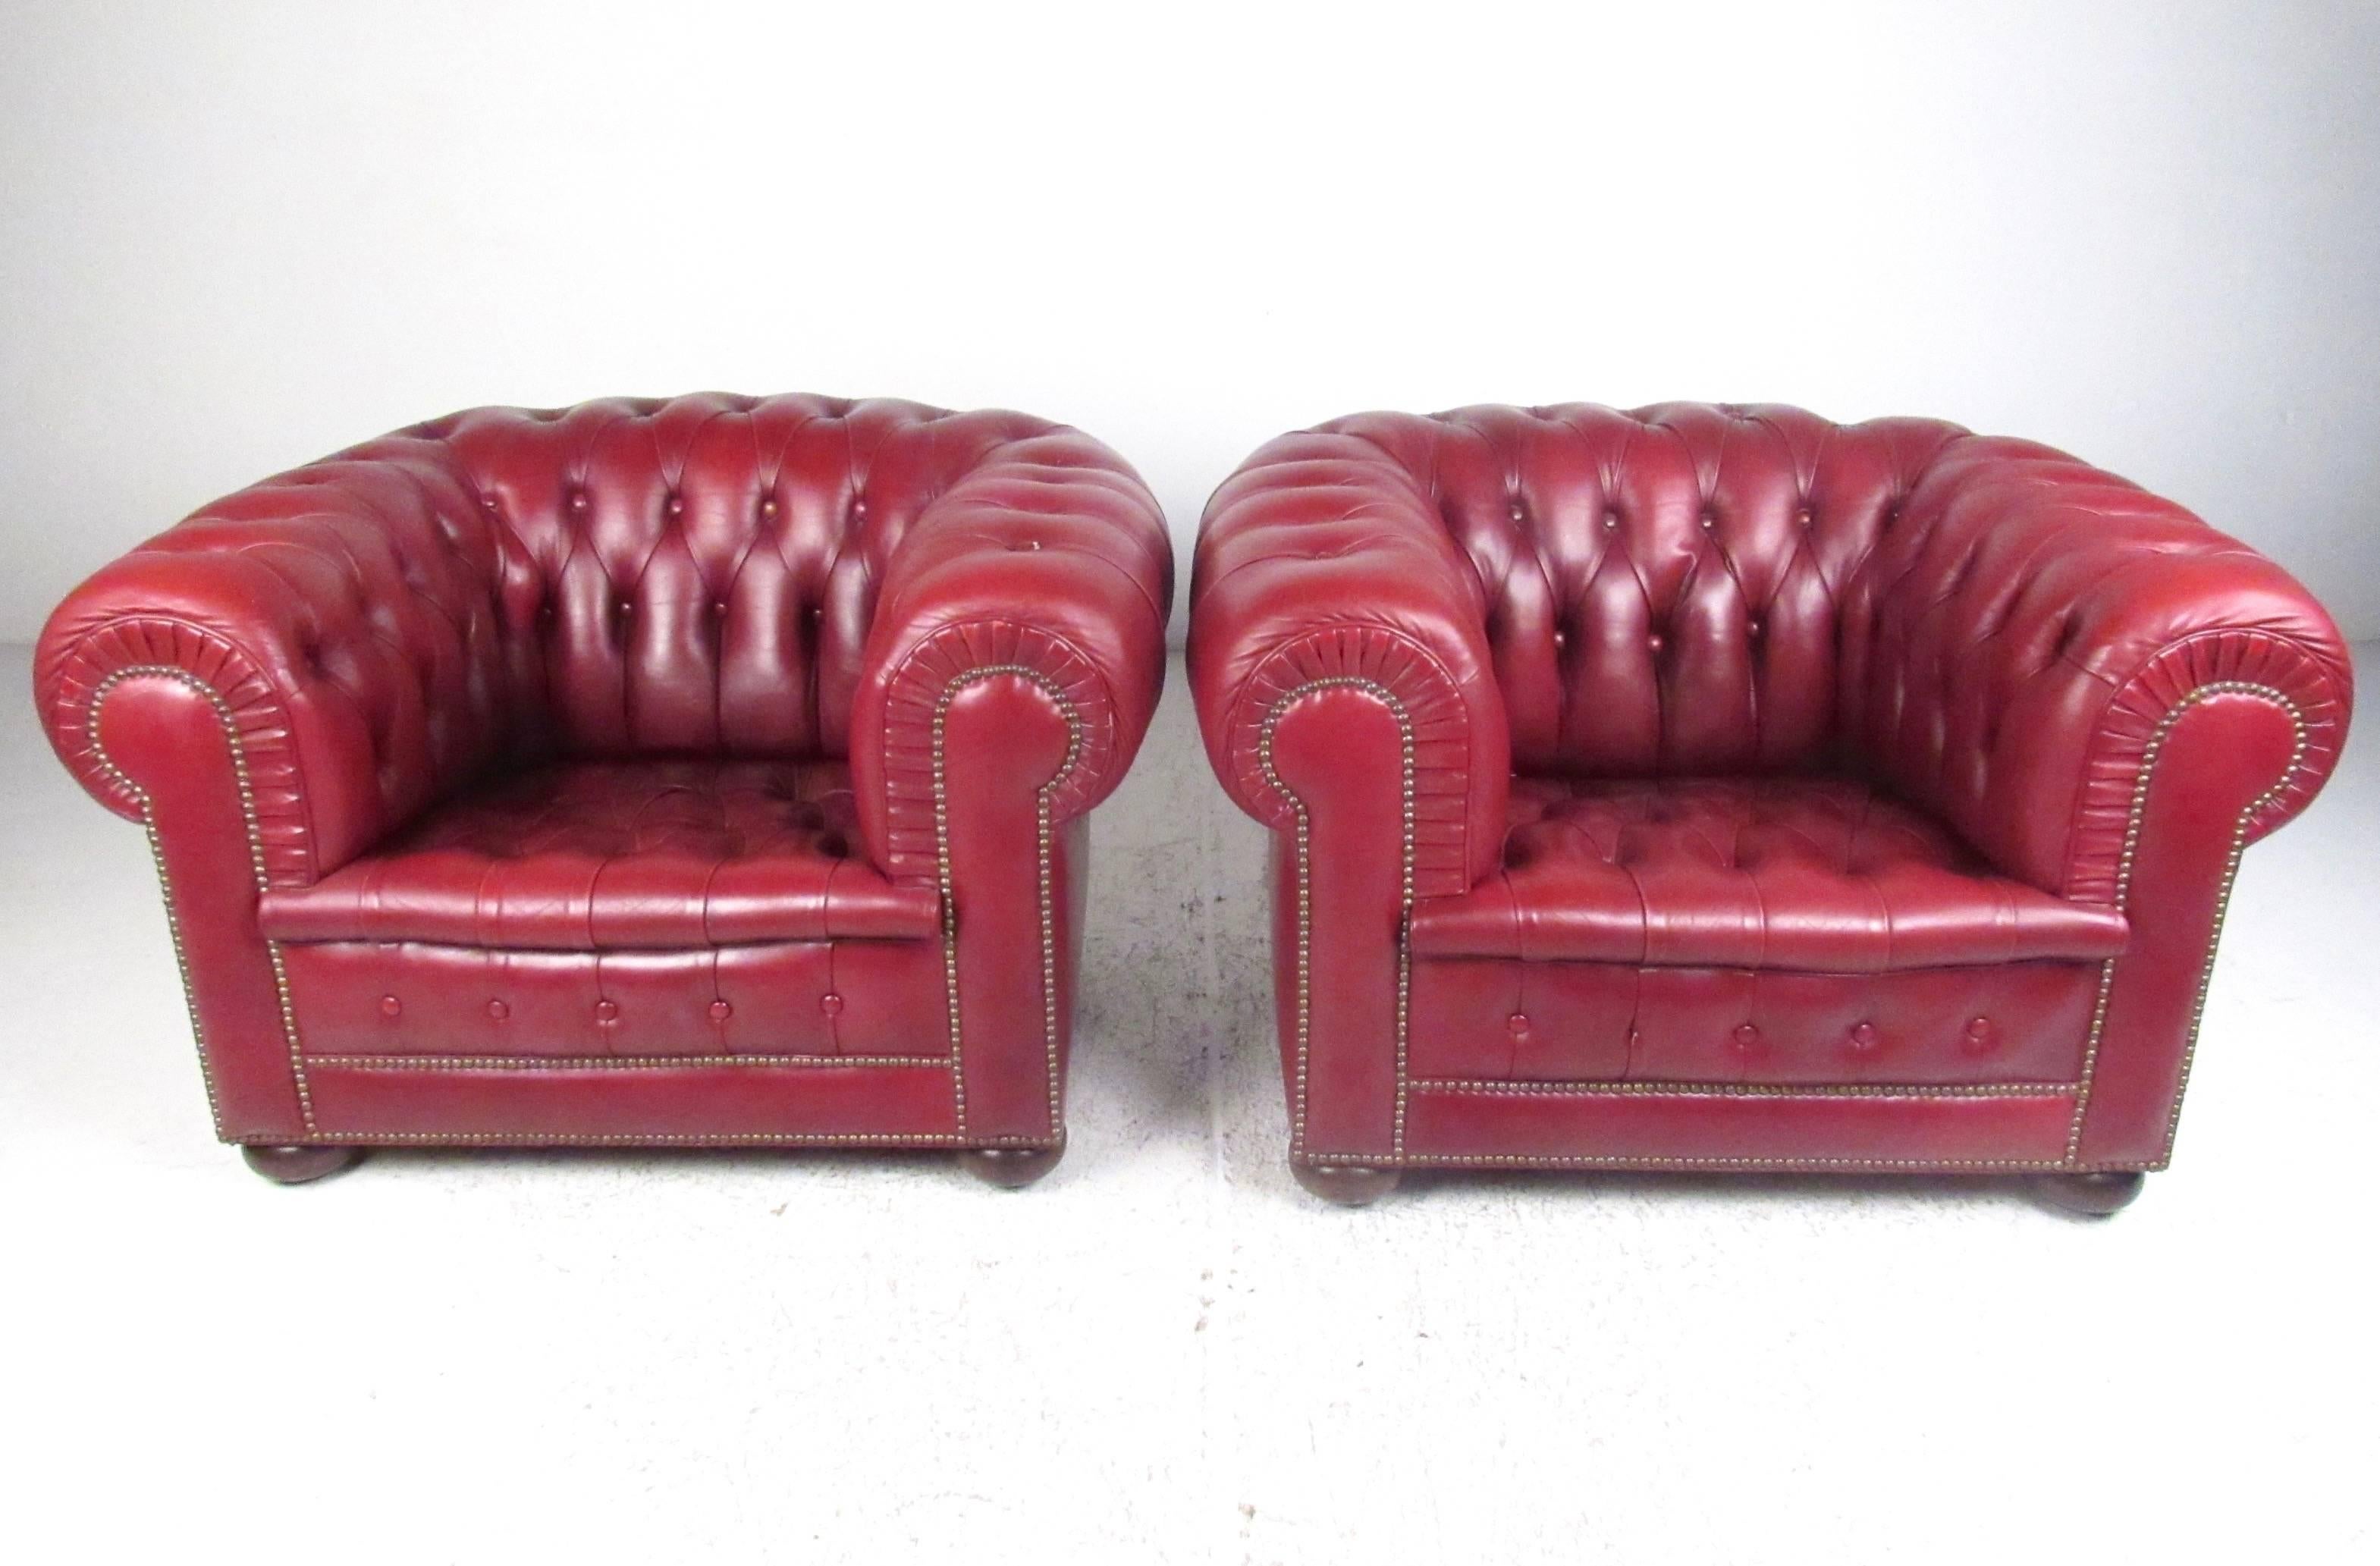 This stylish pair of Chesterfield lounge chairs feature plush oxblood red leather covering, spacious comfortable seats, and rounded hardwood feet. Striking club chairs make an impressive addition to any seating area. Please confirm item location (NY